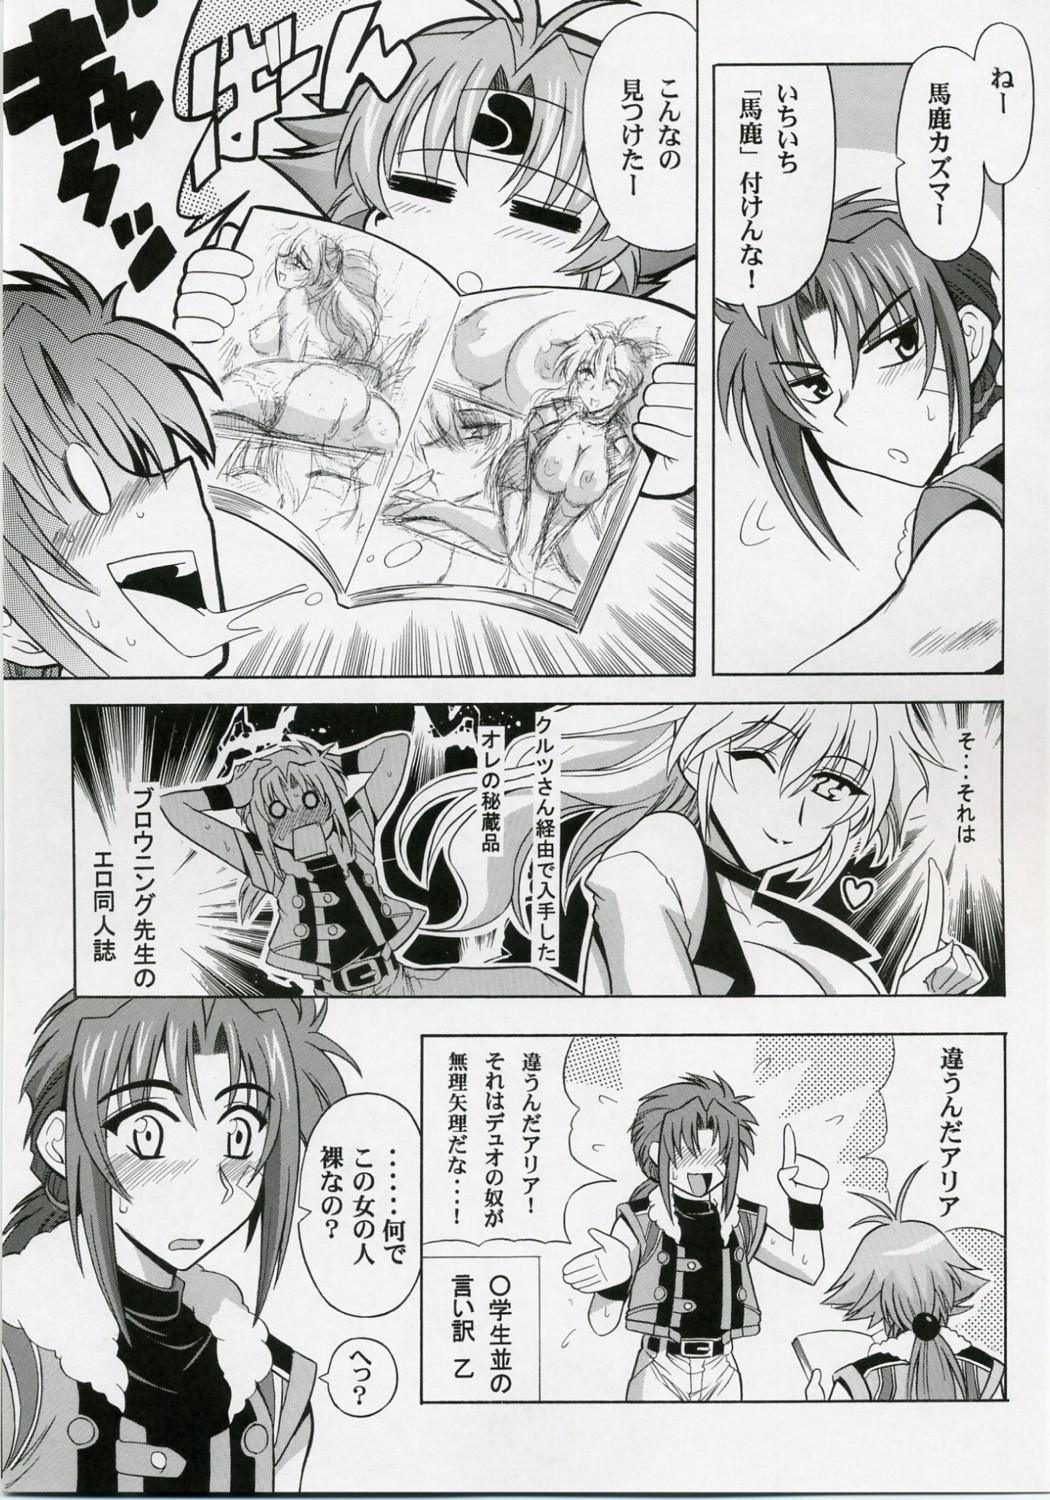 African Ore no Heart wa Red Zone - Super robot wars Bj - Page 6